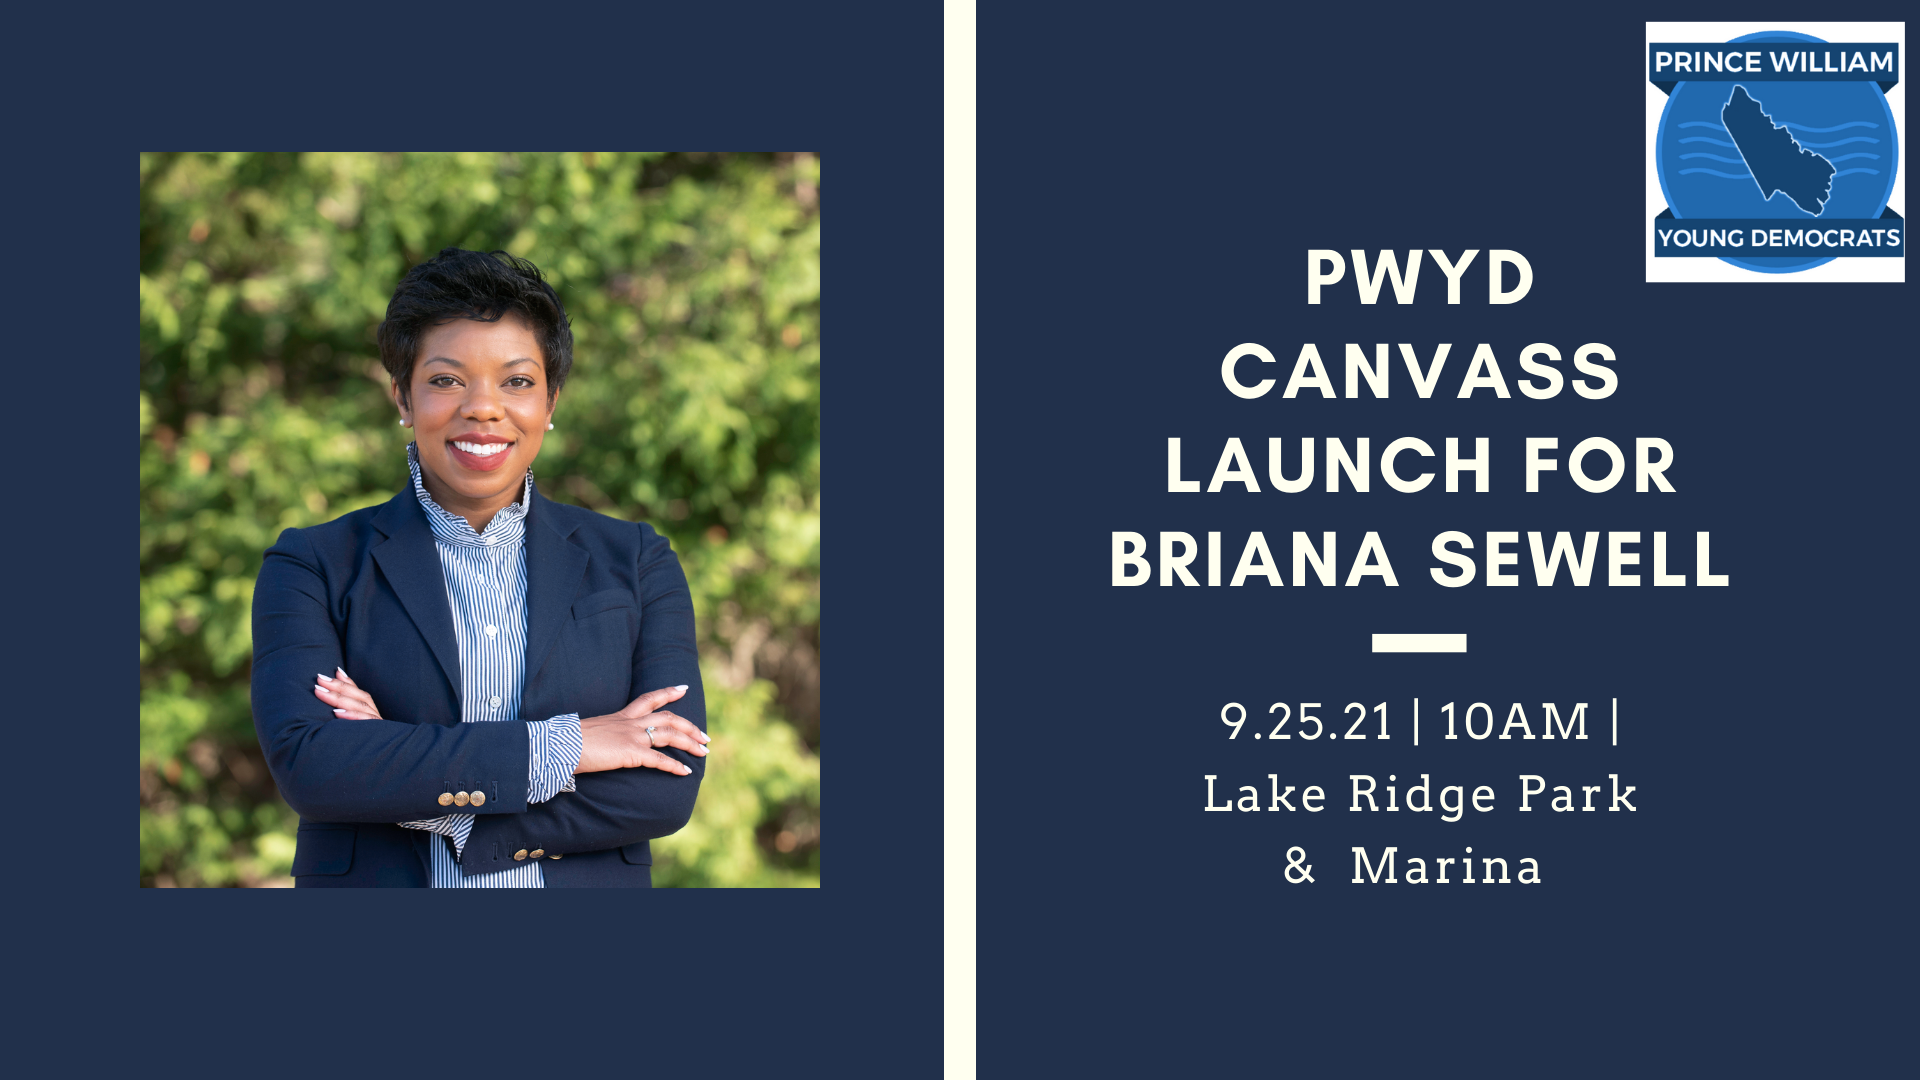 Prince William Young Democrats Canvass Launch For Briana Sewell